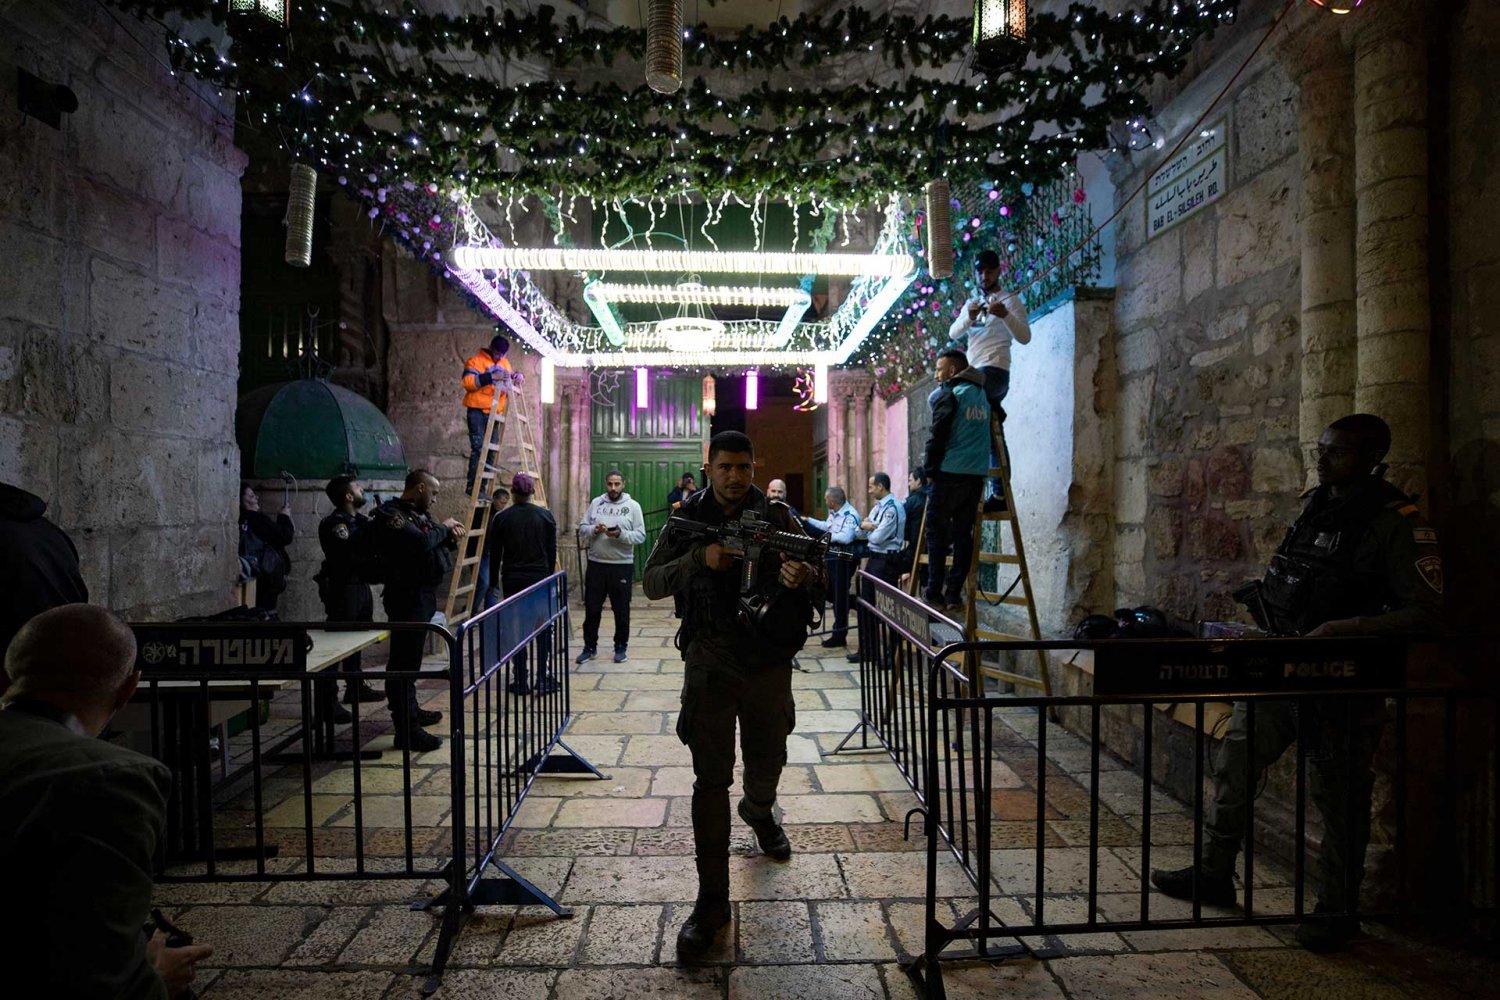 Ramadan decorations and soldier in the Old City of Jerusalem